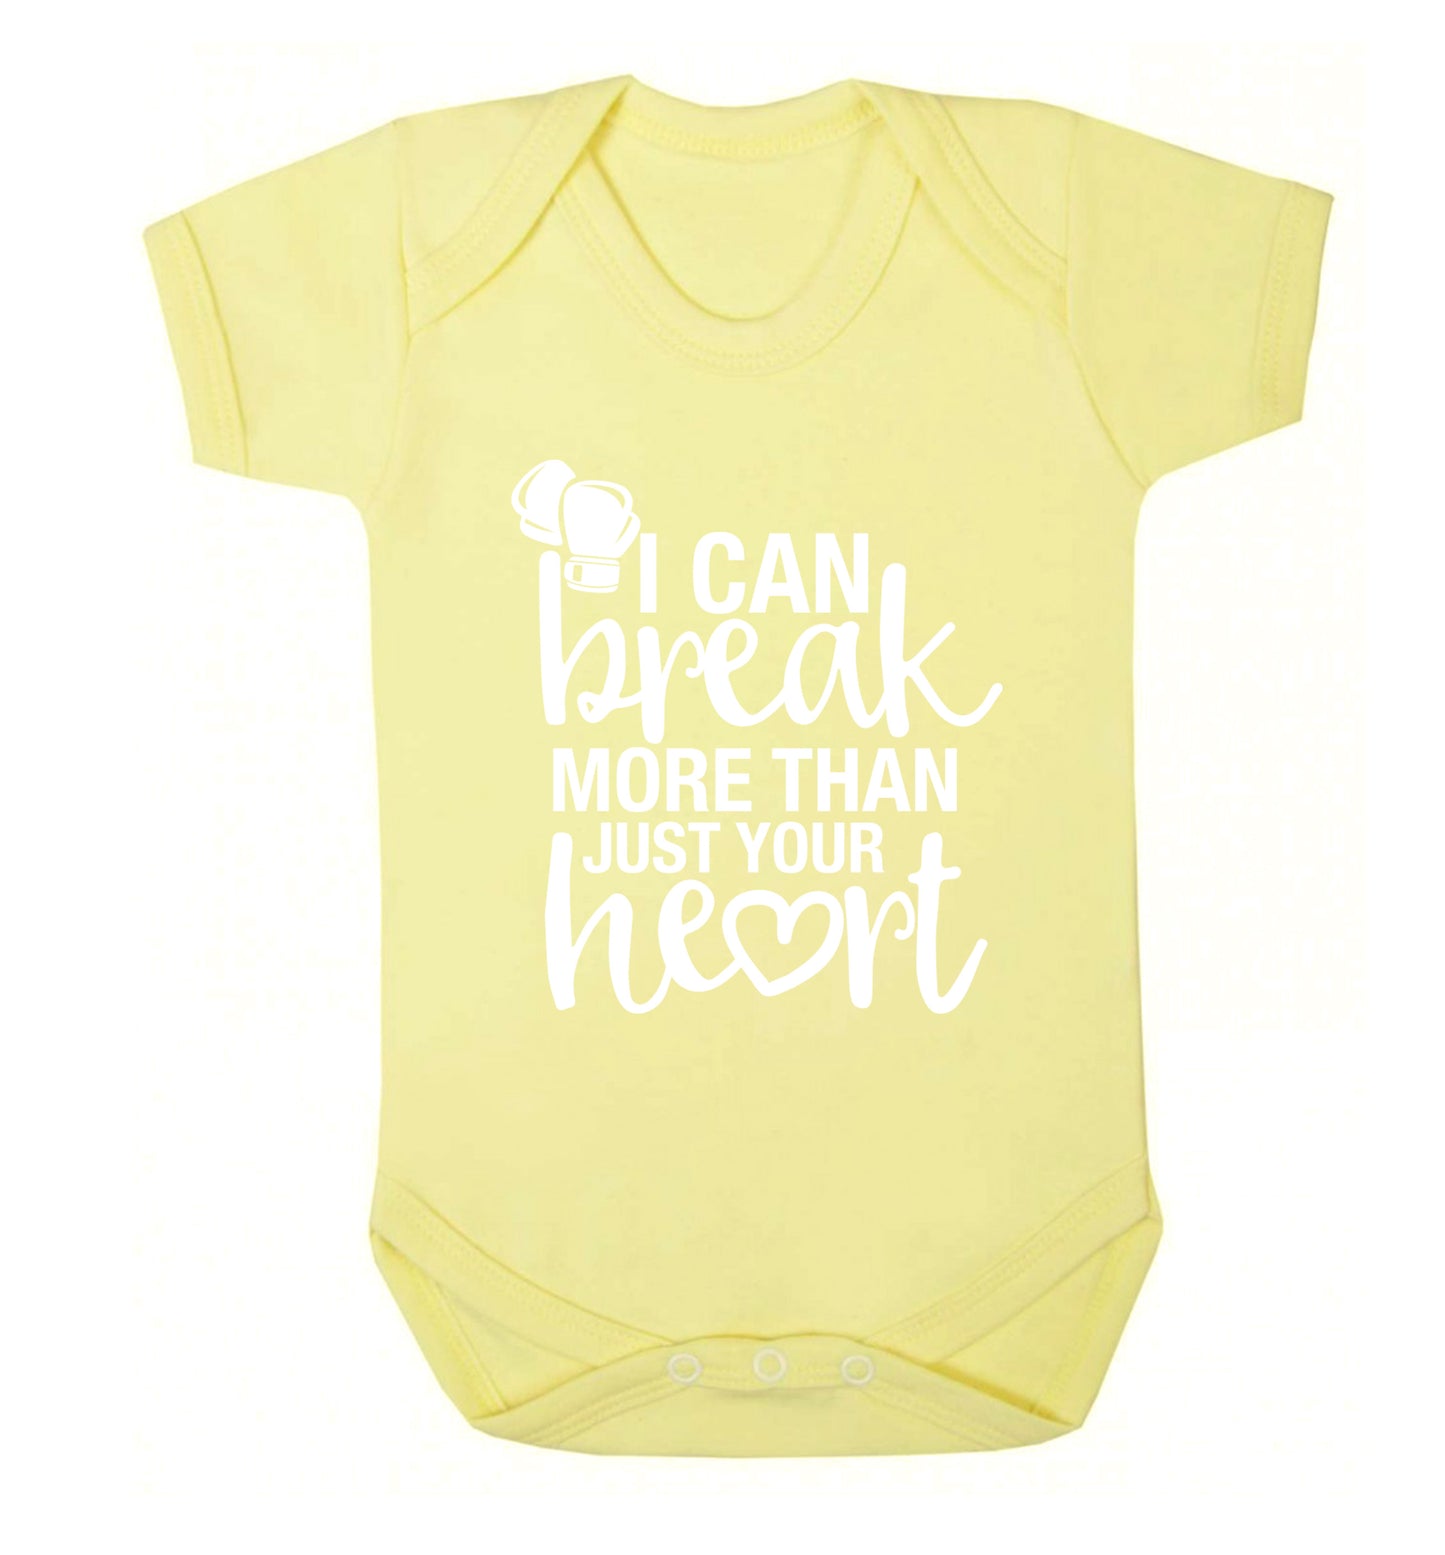 I can break more than just your heart Baby Vest pale yellow 18-24 months